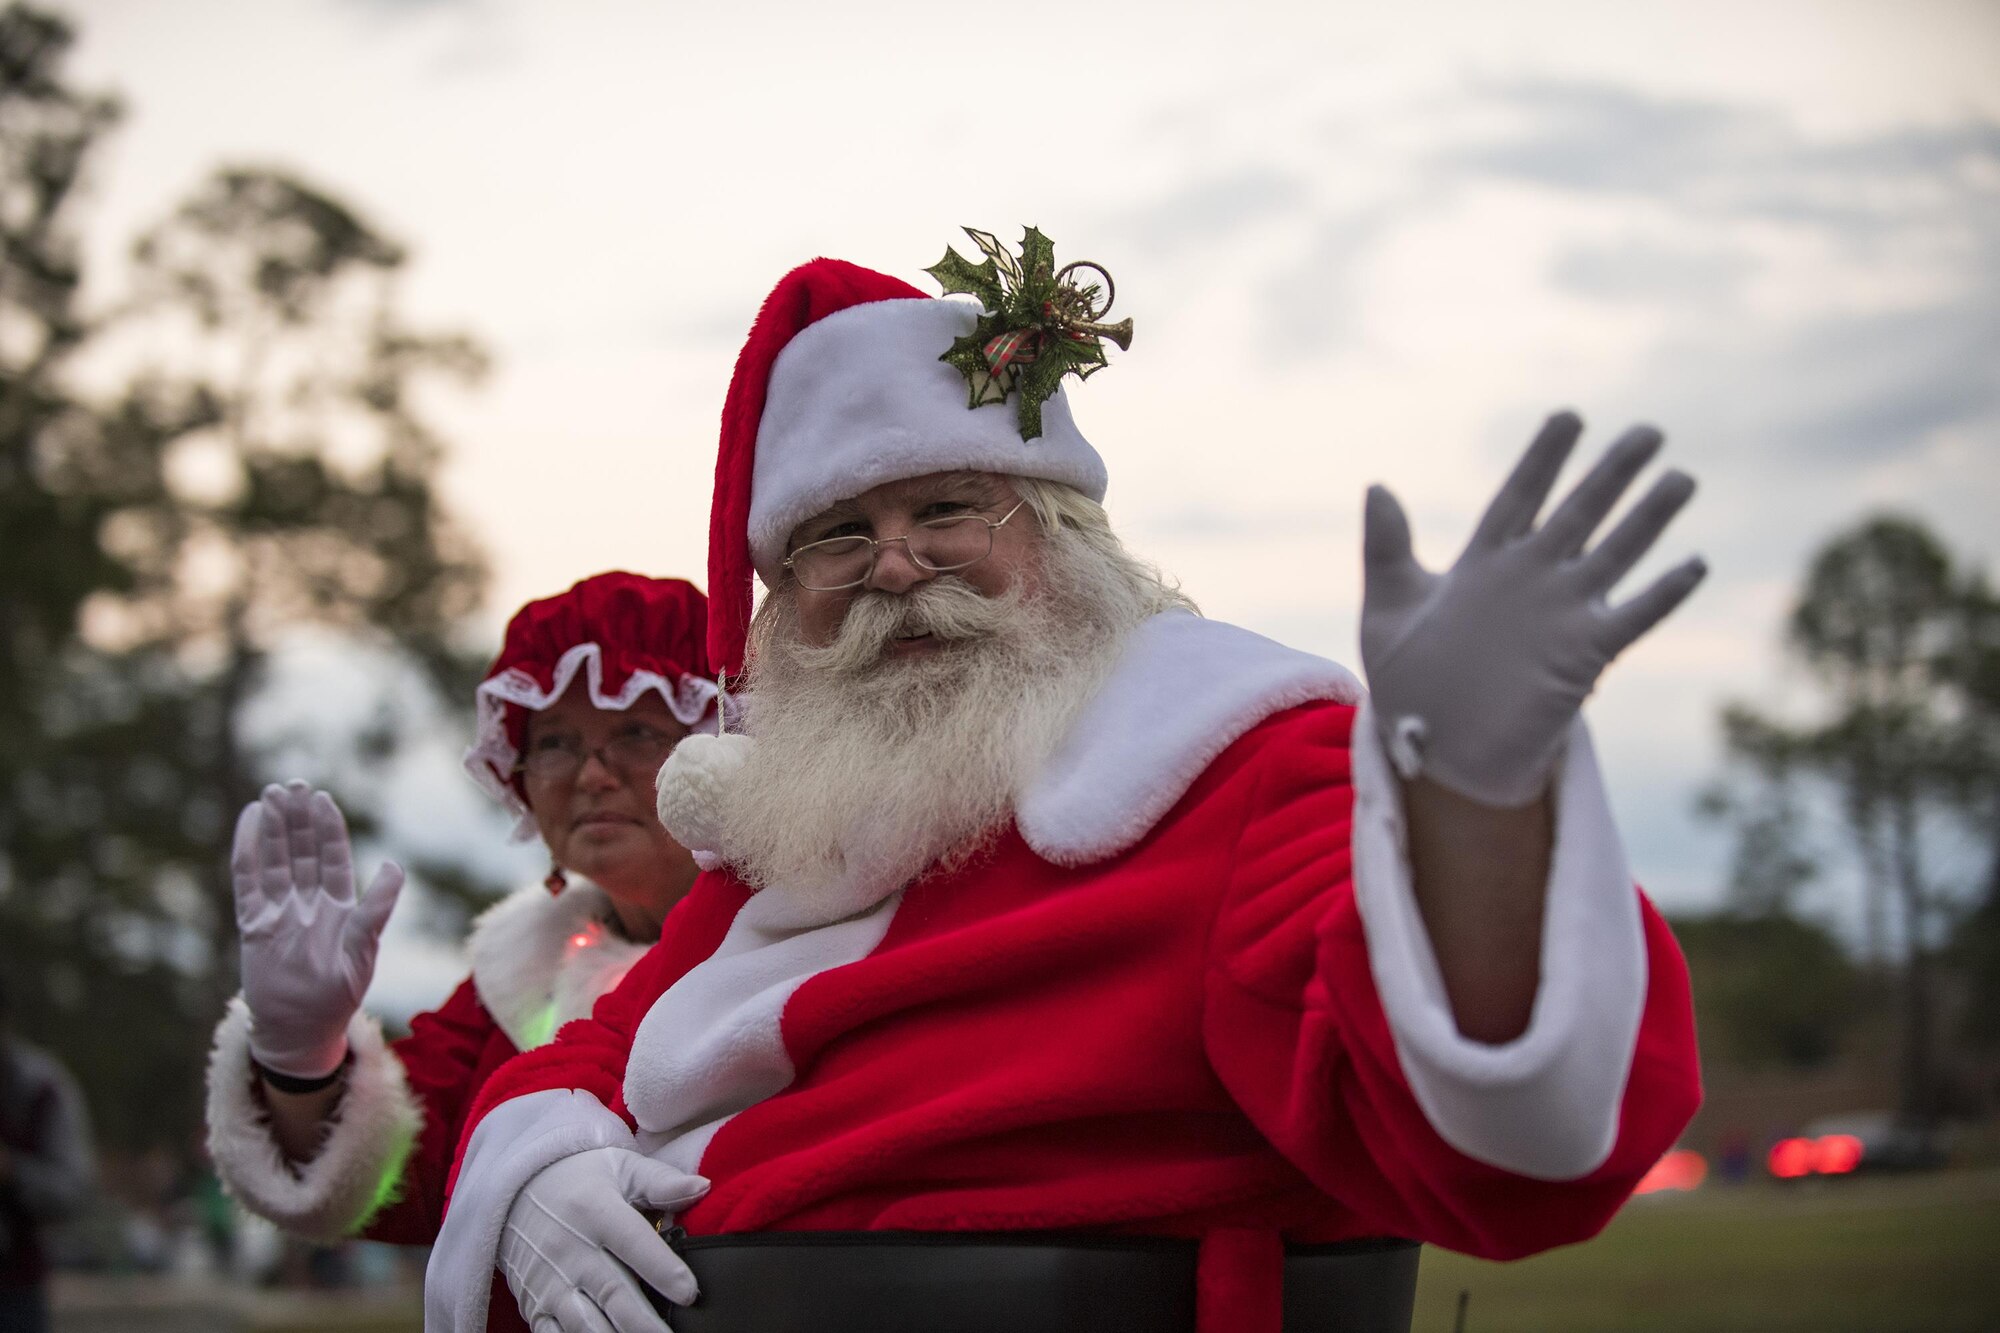 Santa and Mrs. Claus wave during a parade, Dec. 1, 2017, at Moody Air Force Base, Ga. The annual event brings the base community together as a way to show thanks for their continuous sacrifice and celebrate the holiday season. The celebration included a parade, raffle give-a-ways, children’s activities and traditional lighting of the base Christmas tree by families of deployed Airmen. (U.S. Air Force photo by Andrea Jenkins)